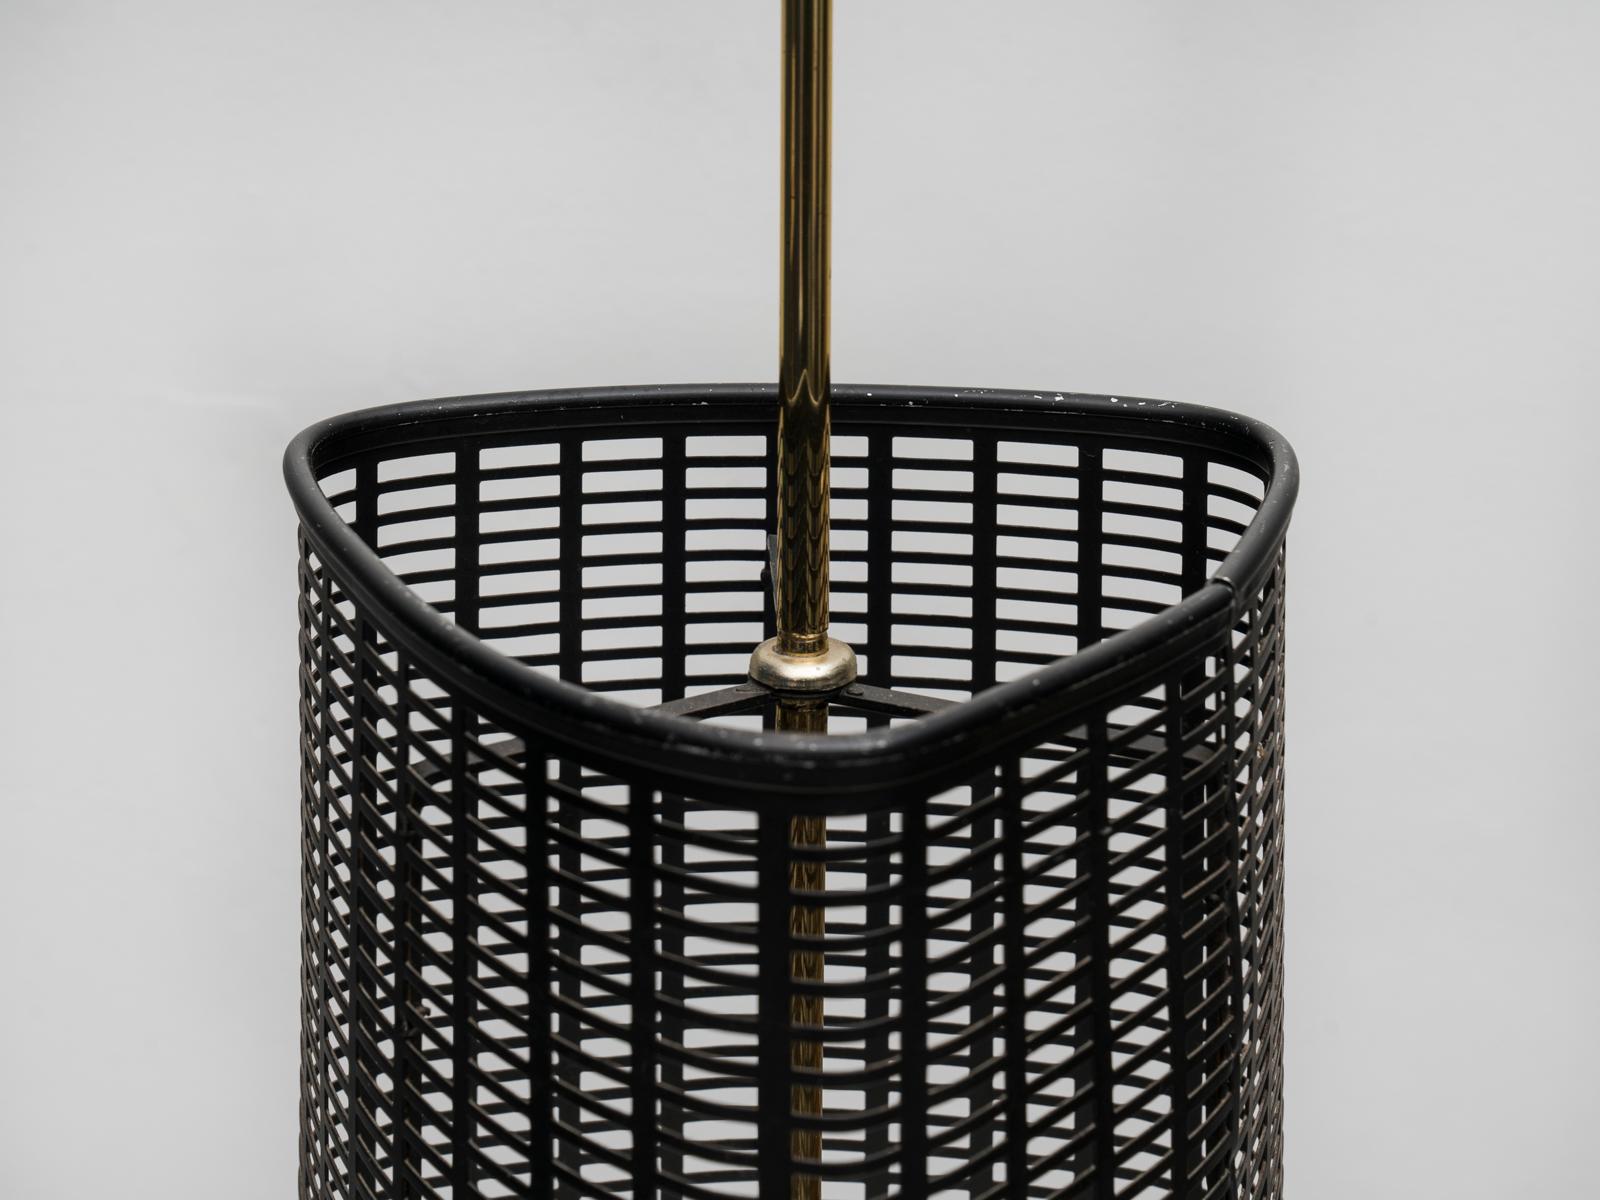 Elegant and well crafted Italian umbrella stand from the 1950s, with a cast iron base, a brass stem with an ivory-varnished top and a black perforated metal body. Perhaps inspired by the work of Mathieu Matégot, this piece is nicely proportioned and